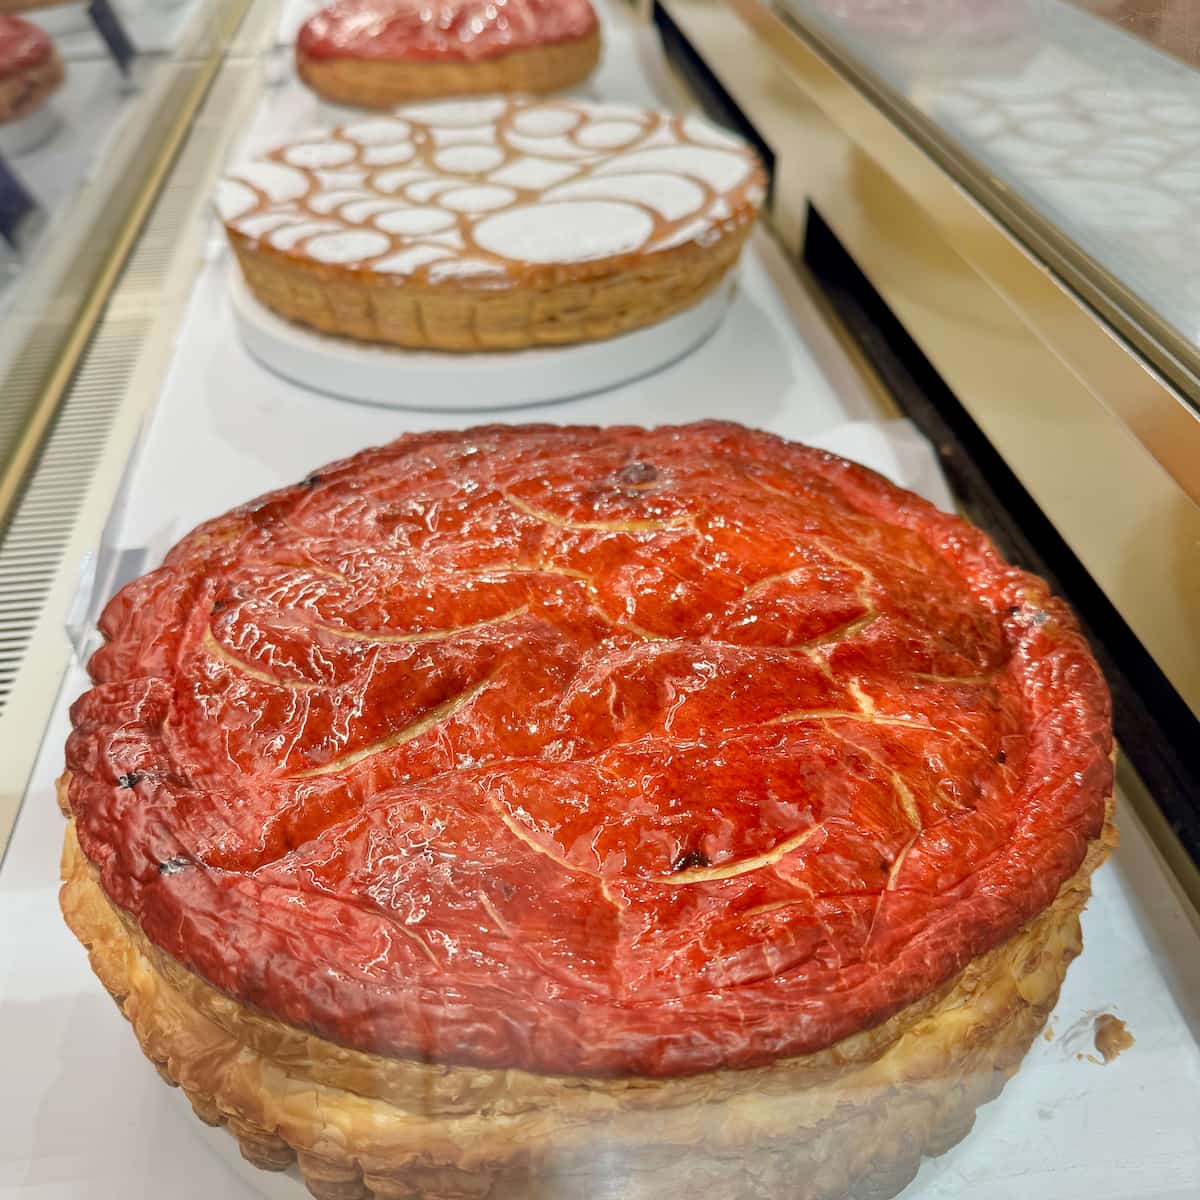 red topped galette of puff pastry cake in the window